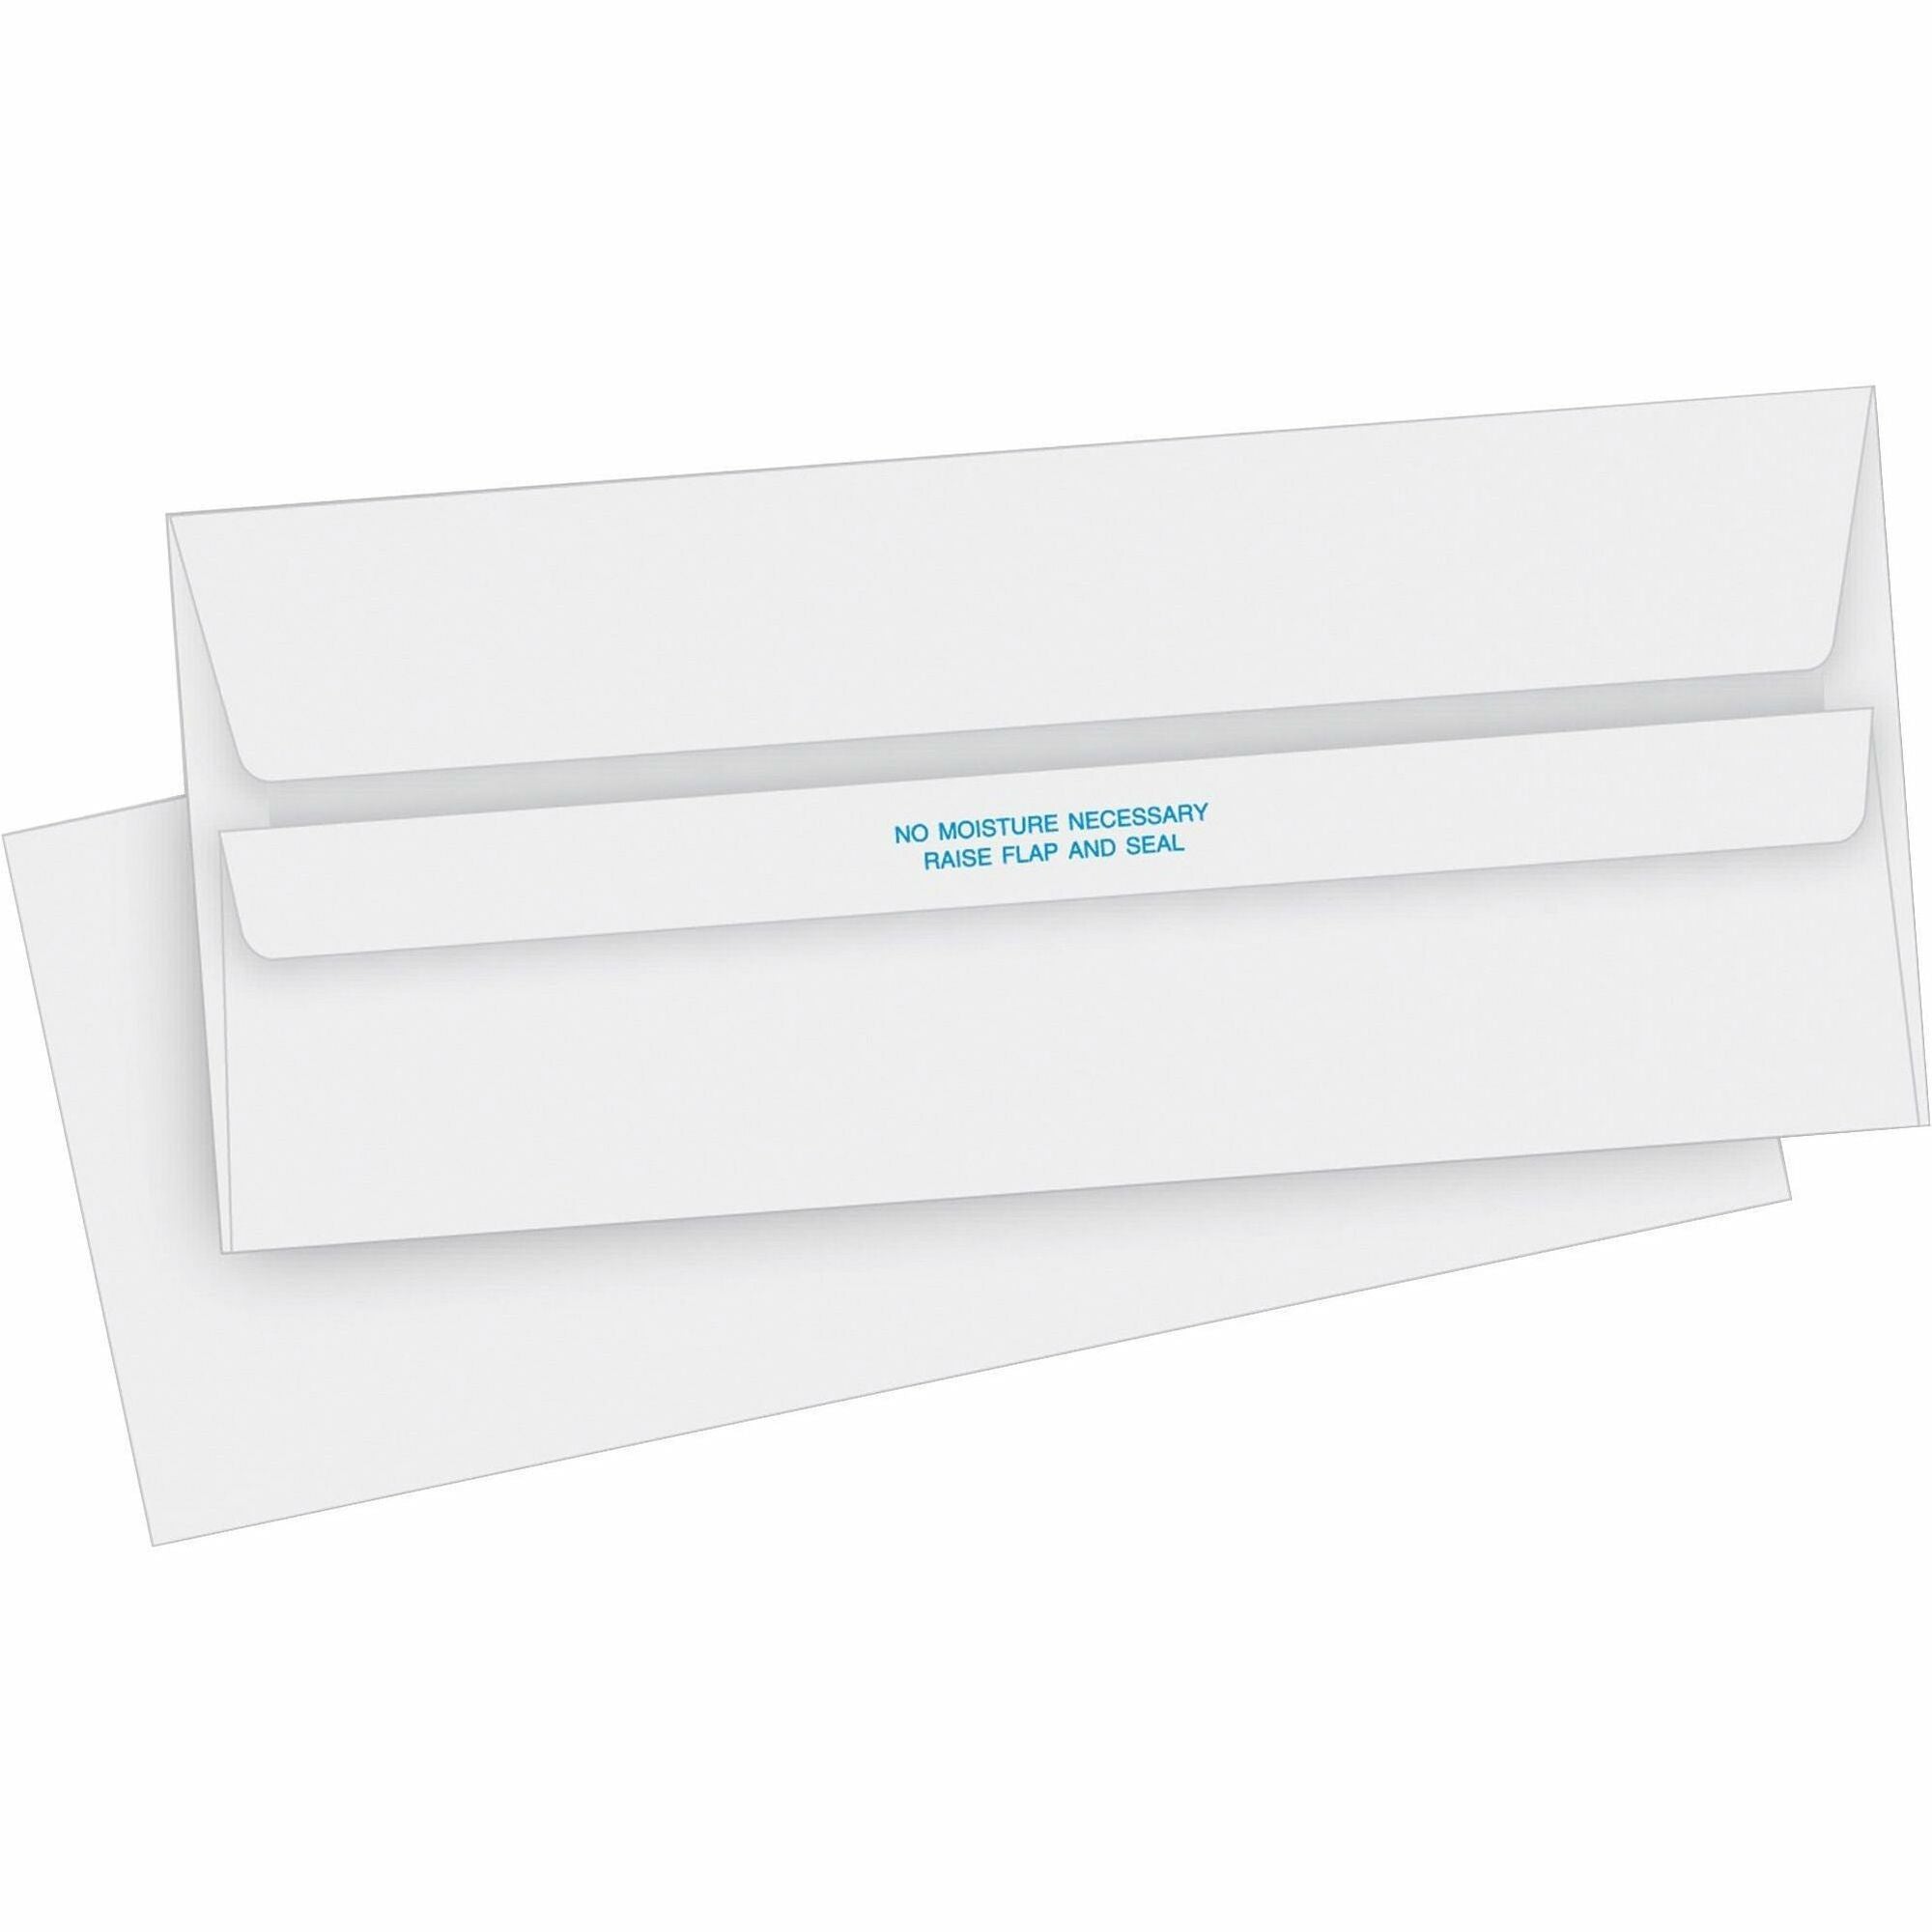 Business Source No. 10 Self-seal Invoice Envelopes - Business - #10 - 4 1/8" Width x 9 1/2" Length - 24 lb - Self-sealing - 500 / Box - White - 